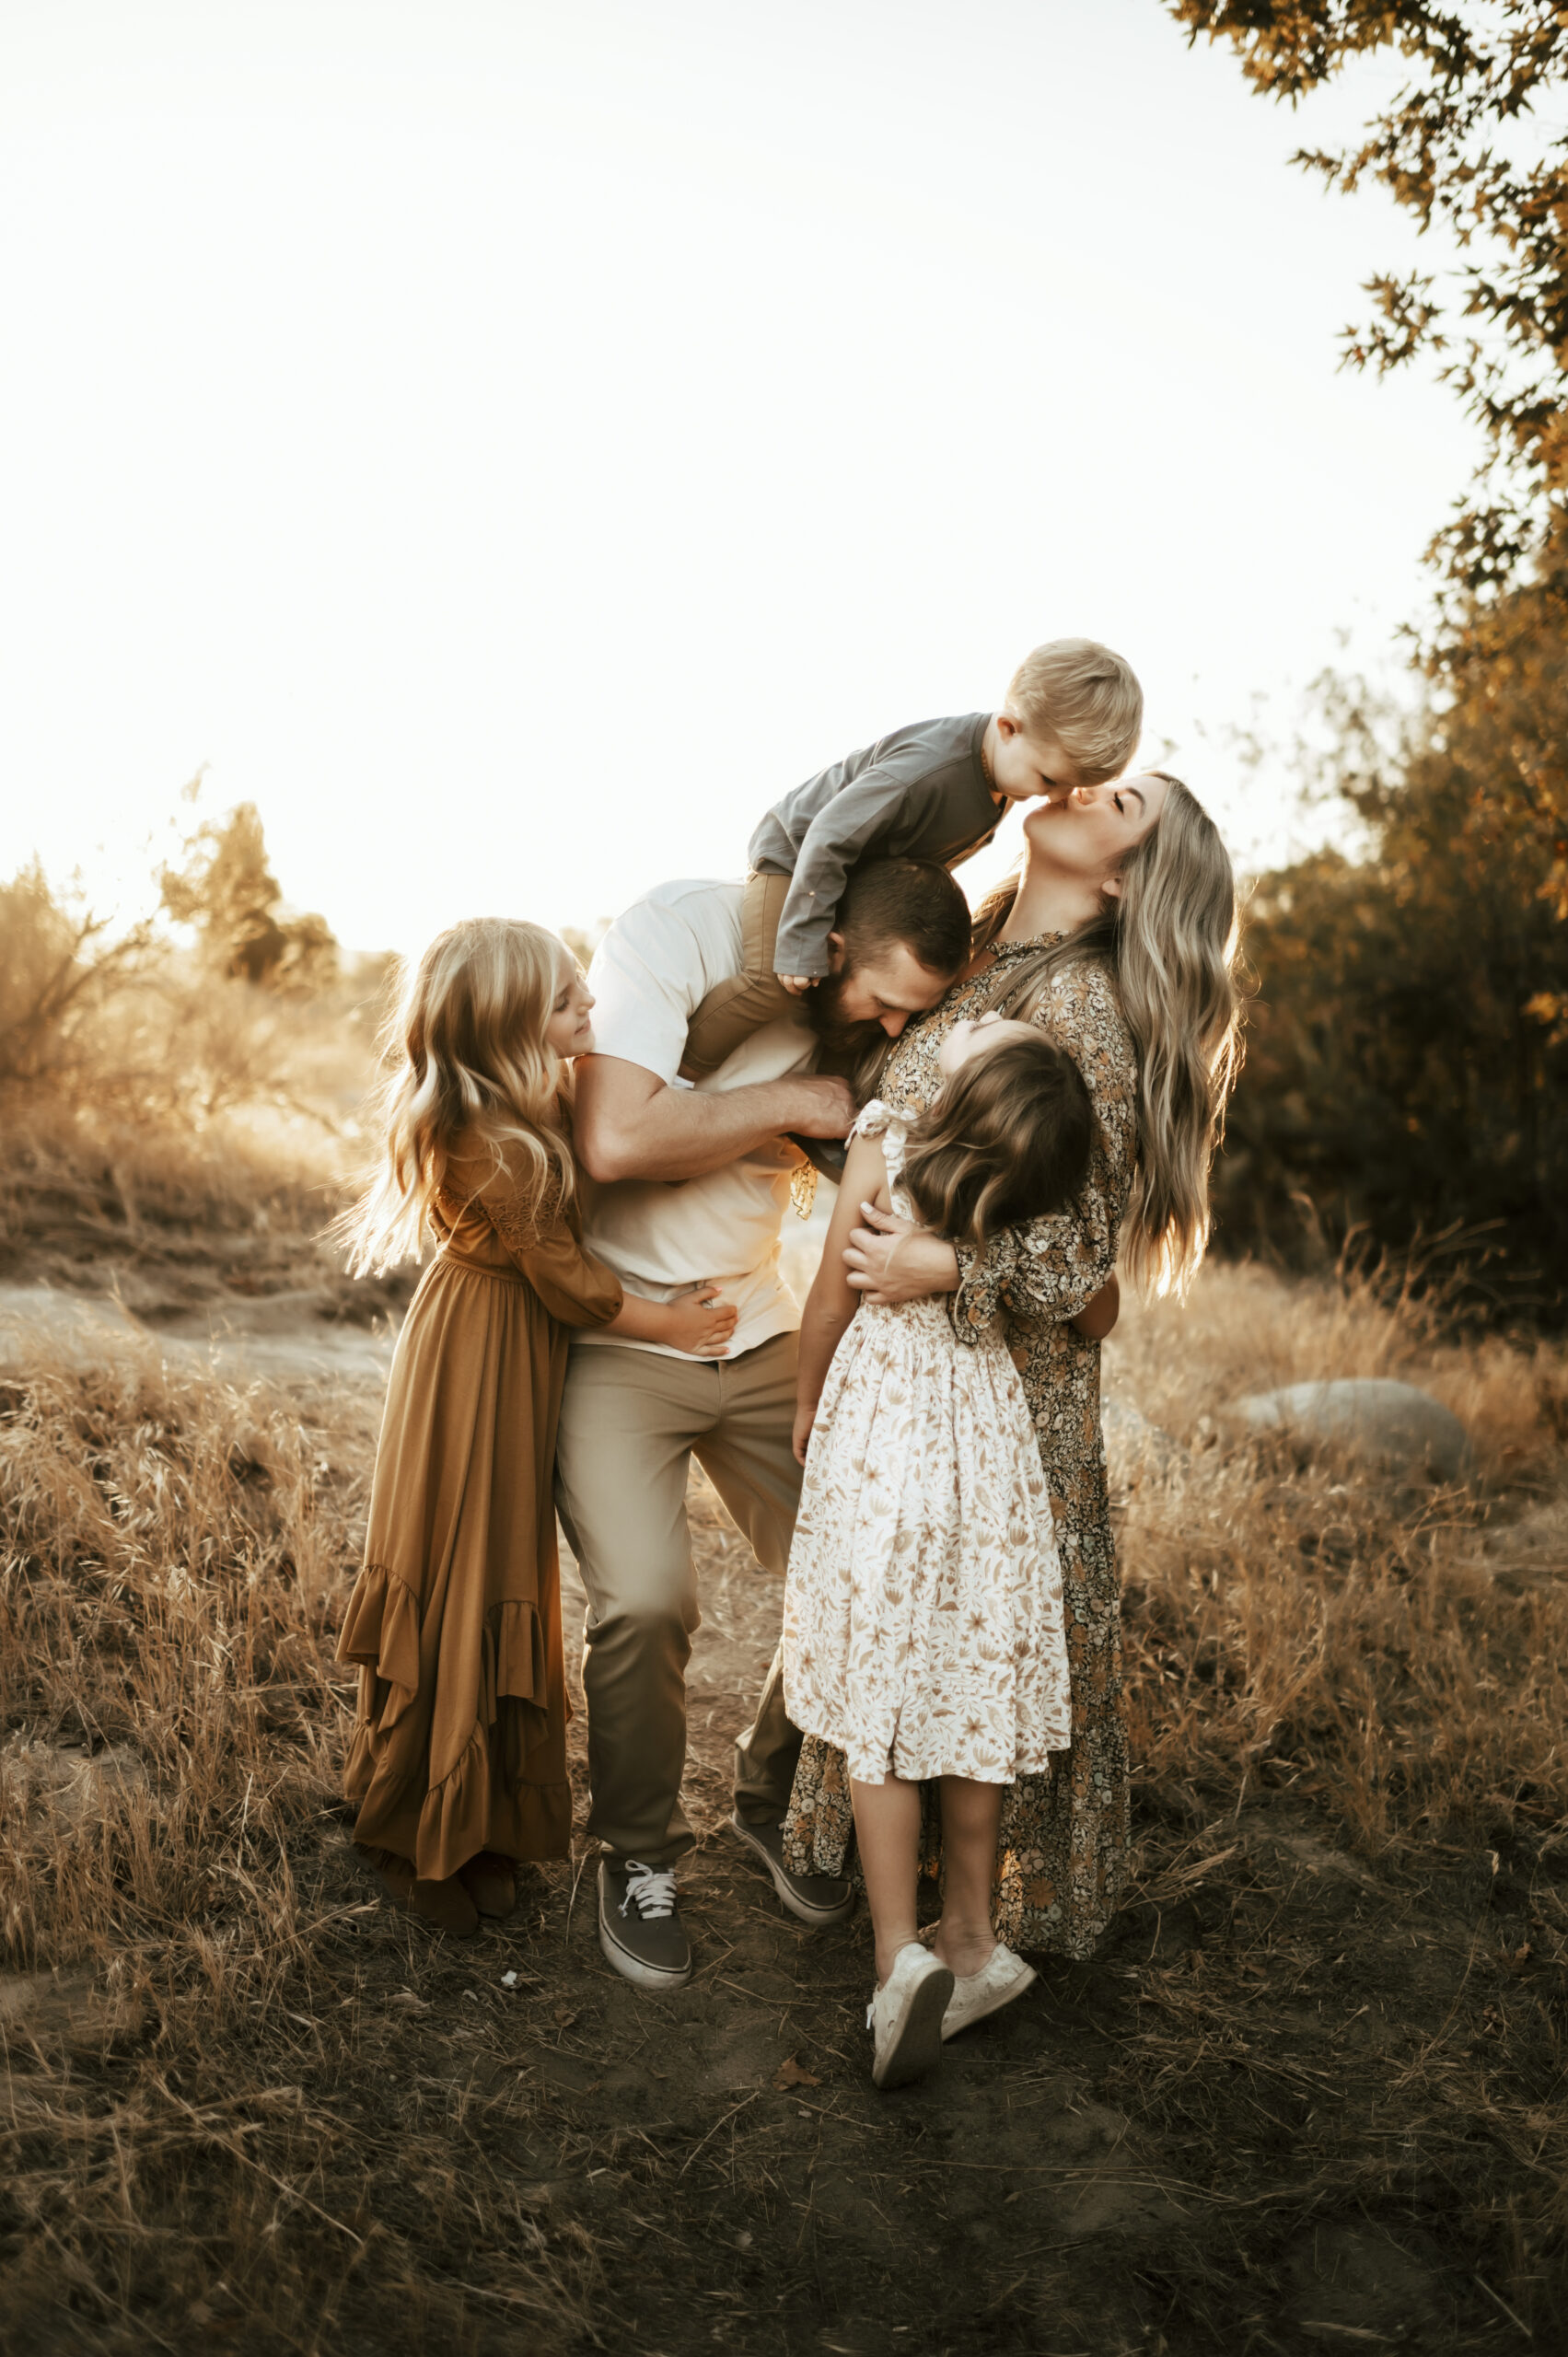 mom kissing baby that’s on dad’s shoulders while daughters are hugging mom and dad in an autumn setting